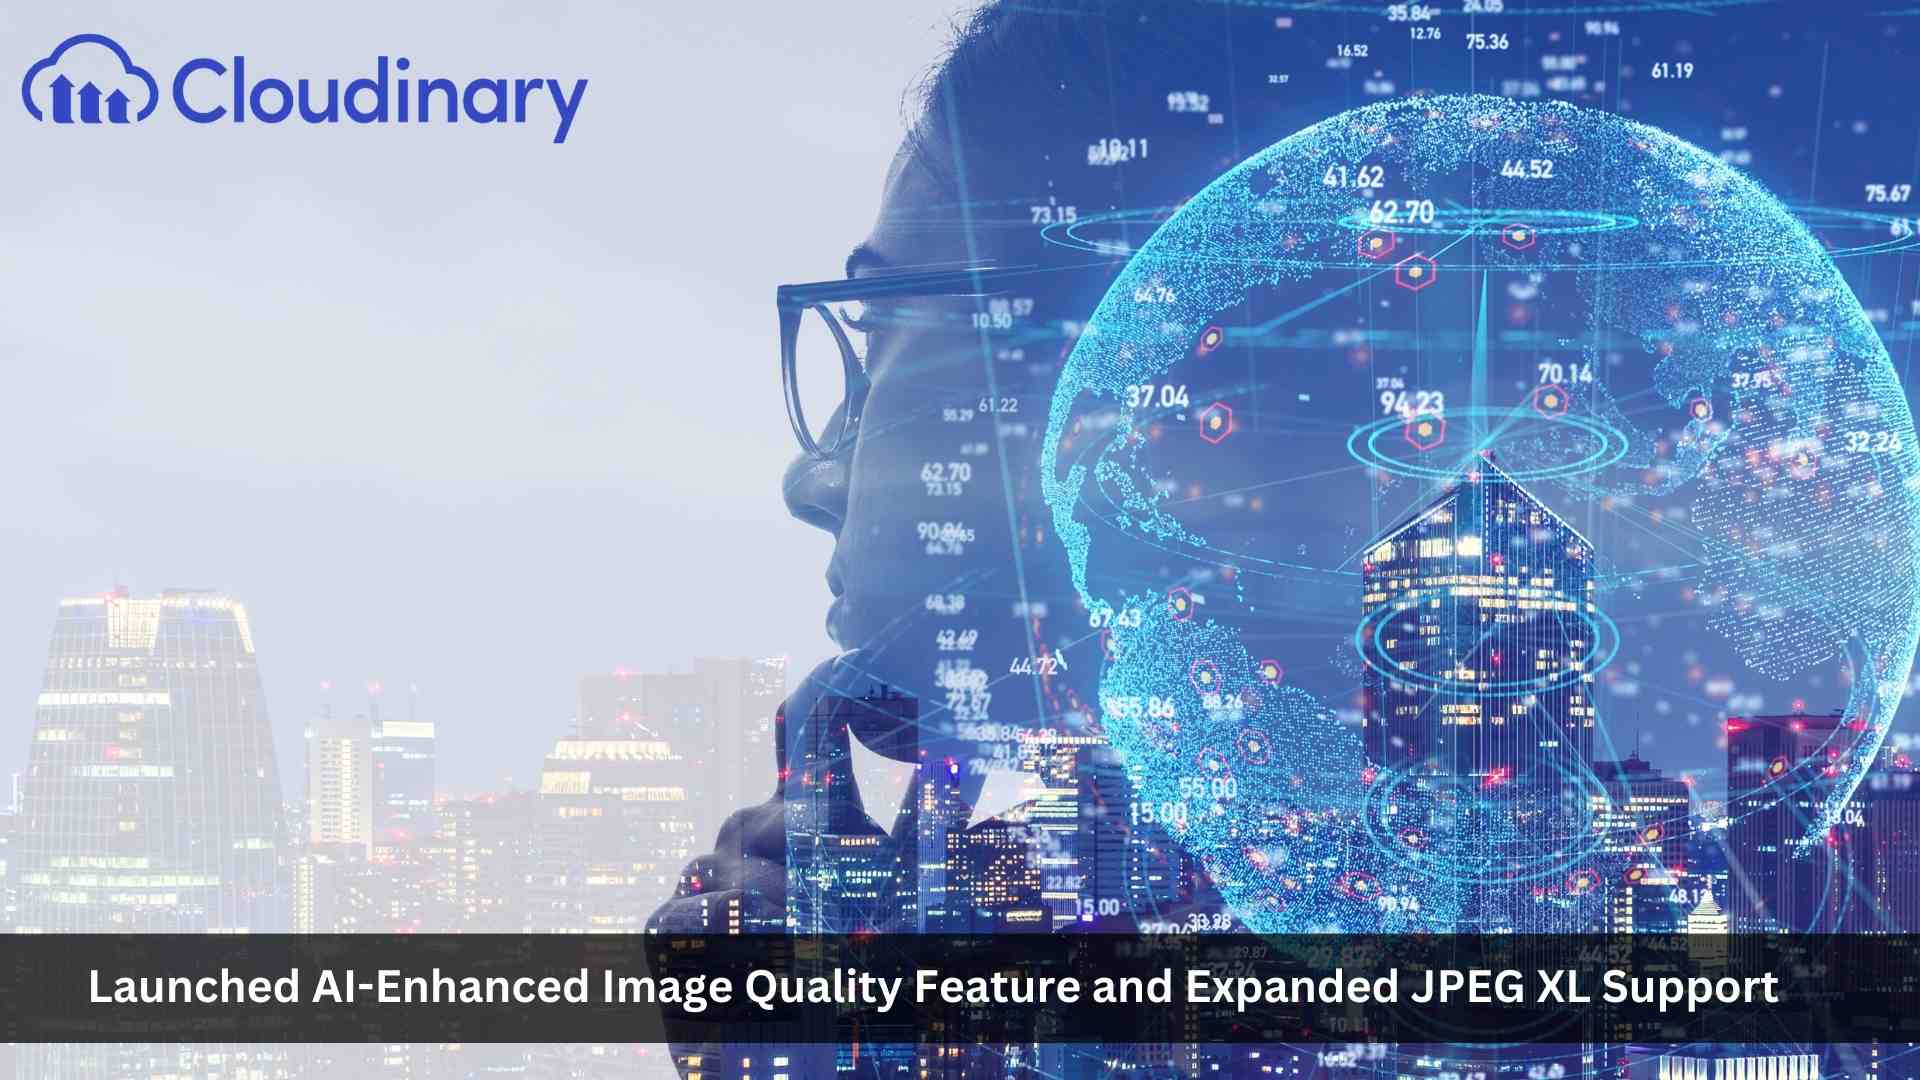 Cloudinary Uses AI to Further Improve Image Quality Online, Announces JPEG XL Support for Apple Ecosystem